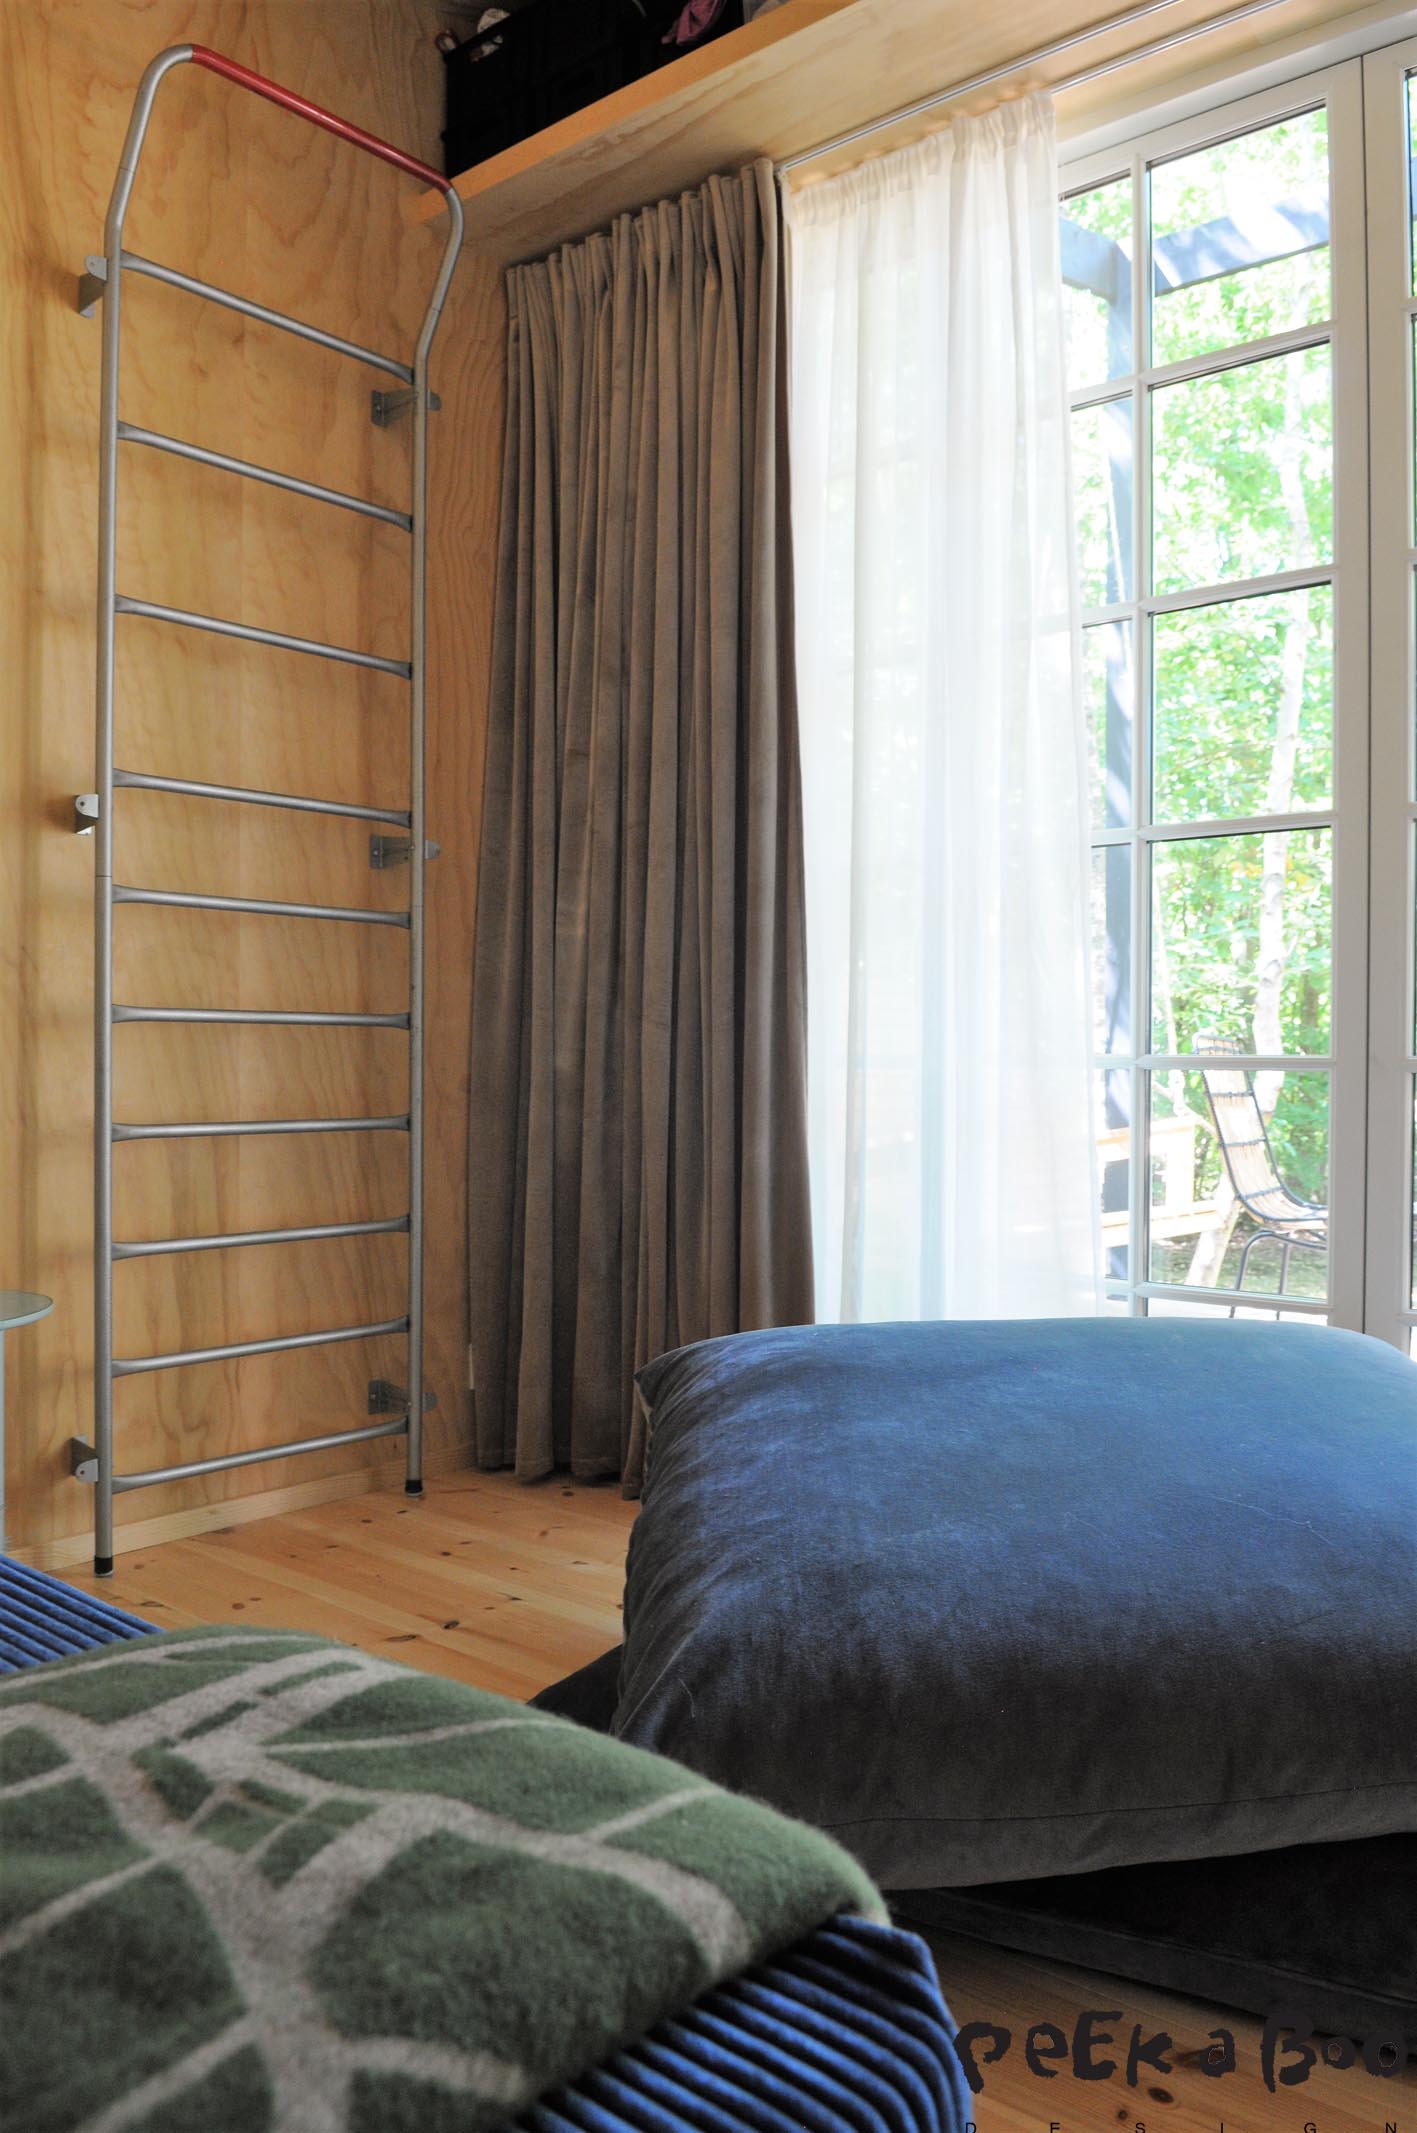 get the hotel look by adding two layer curtains